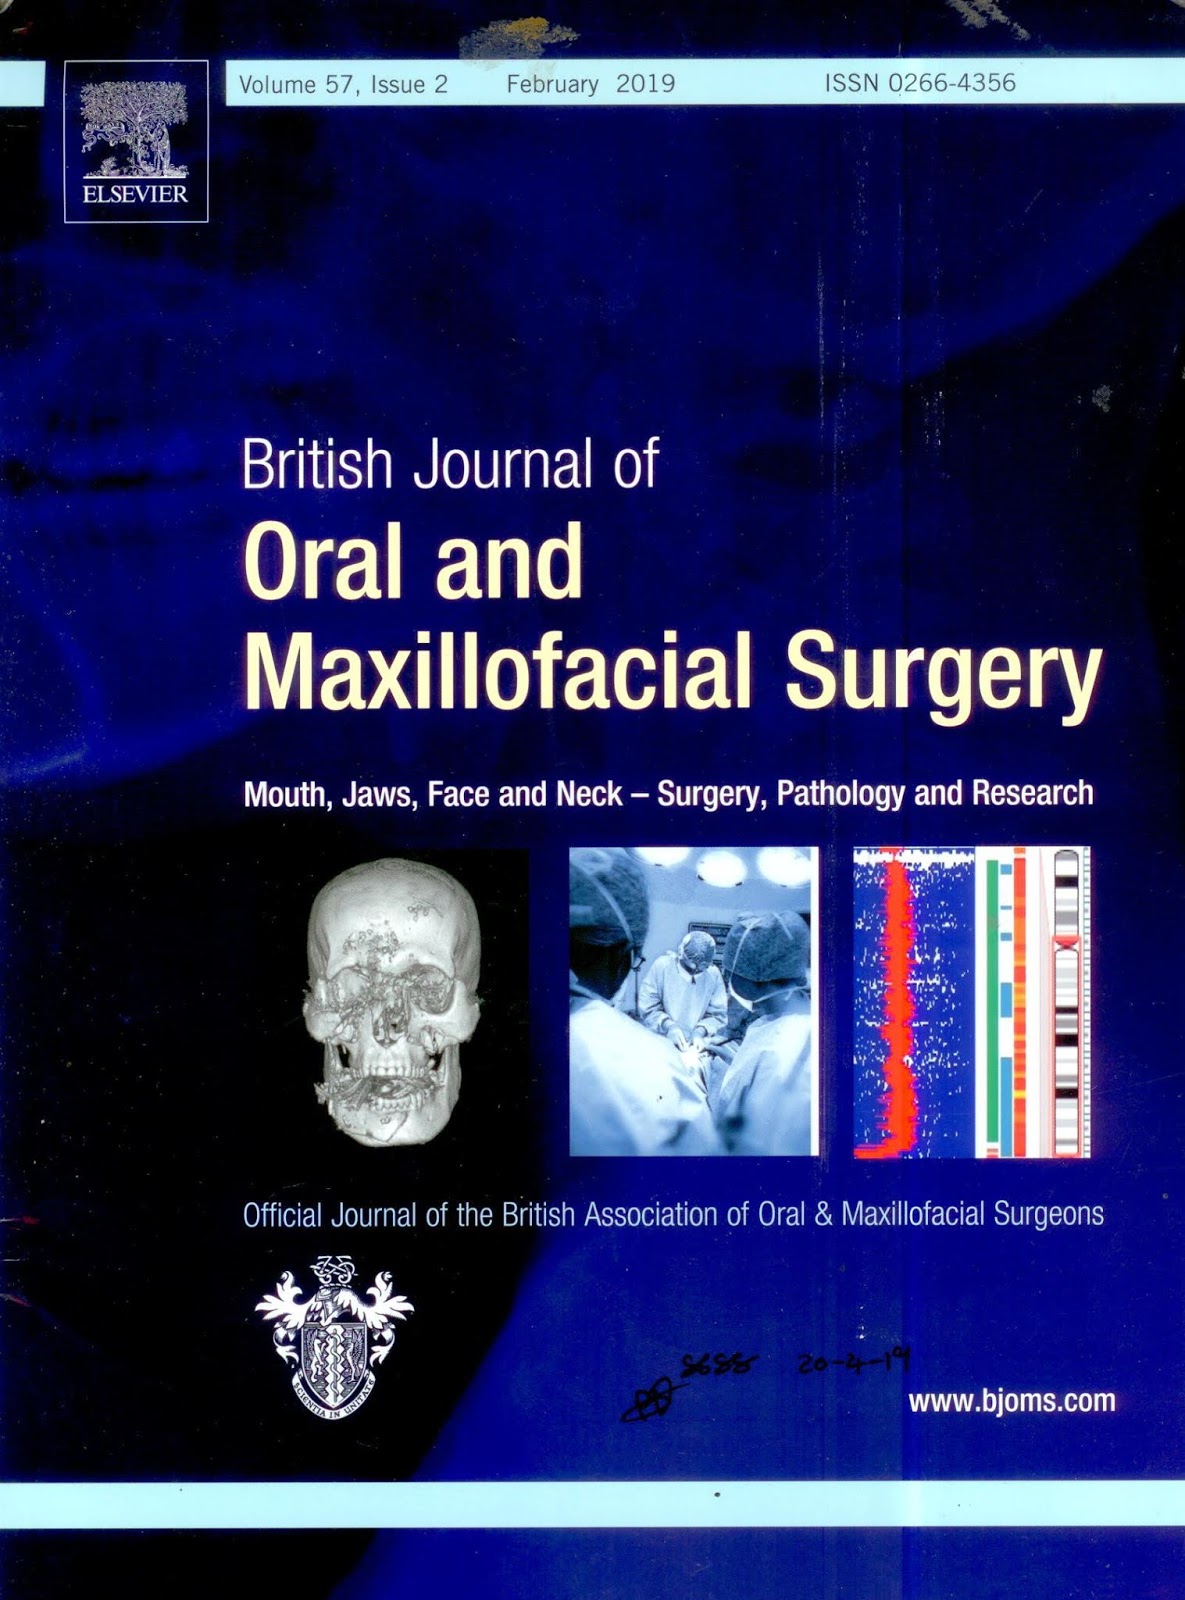 https://www.sciencedirect.com/journal/british-journal-of-oral-and-maxillofacial-surgery/vol/57/issue/2